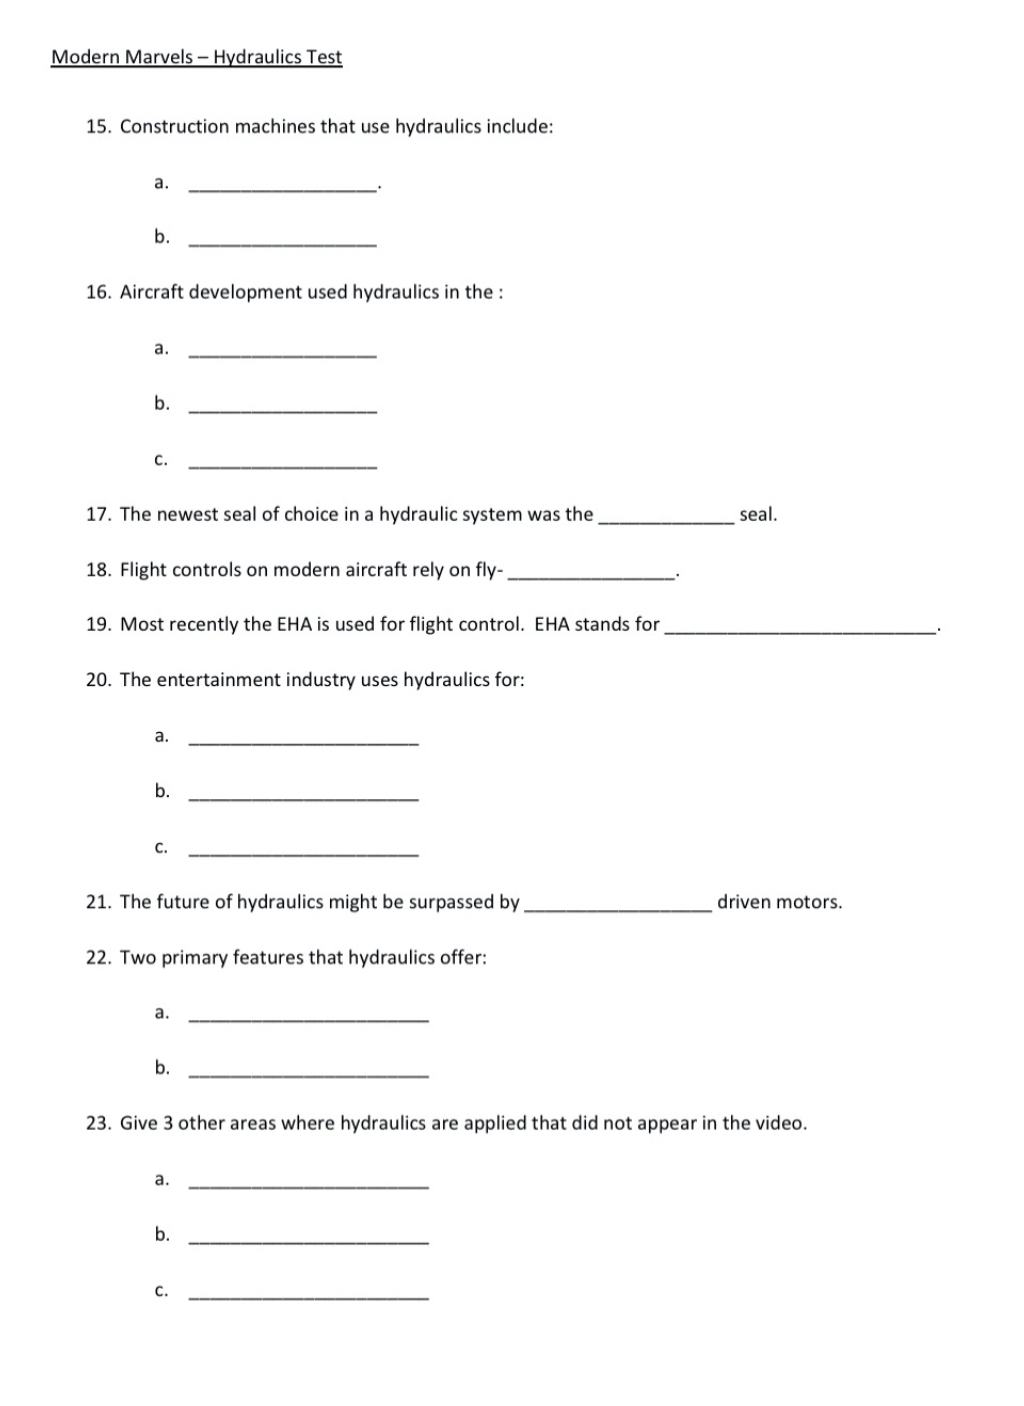 Modern Marvels Cotton Worksheet Answers Free Download Goodimg co